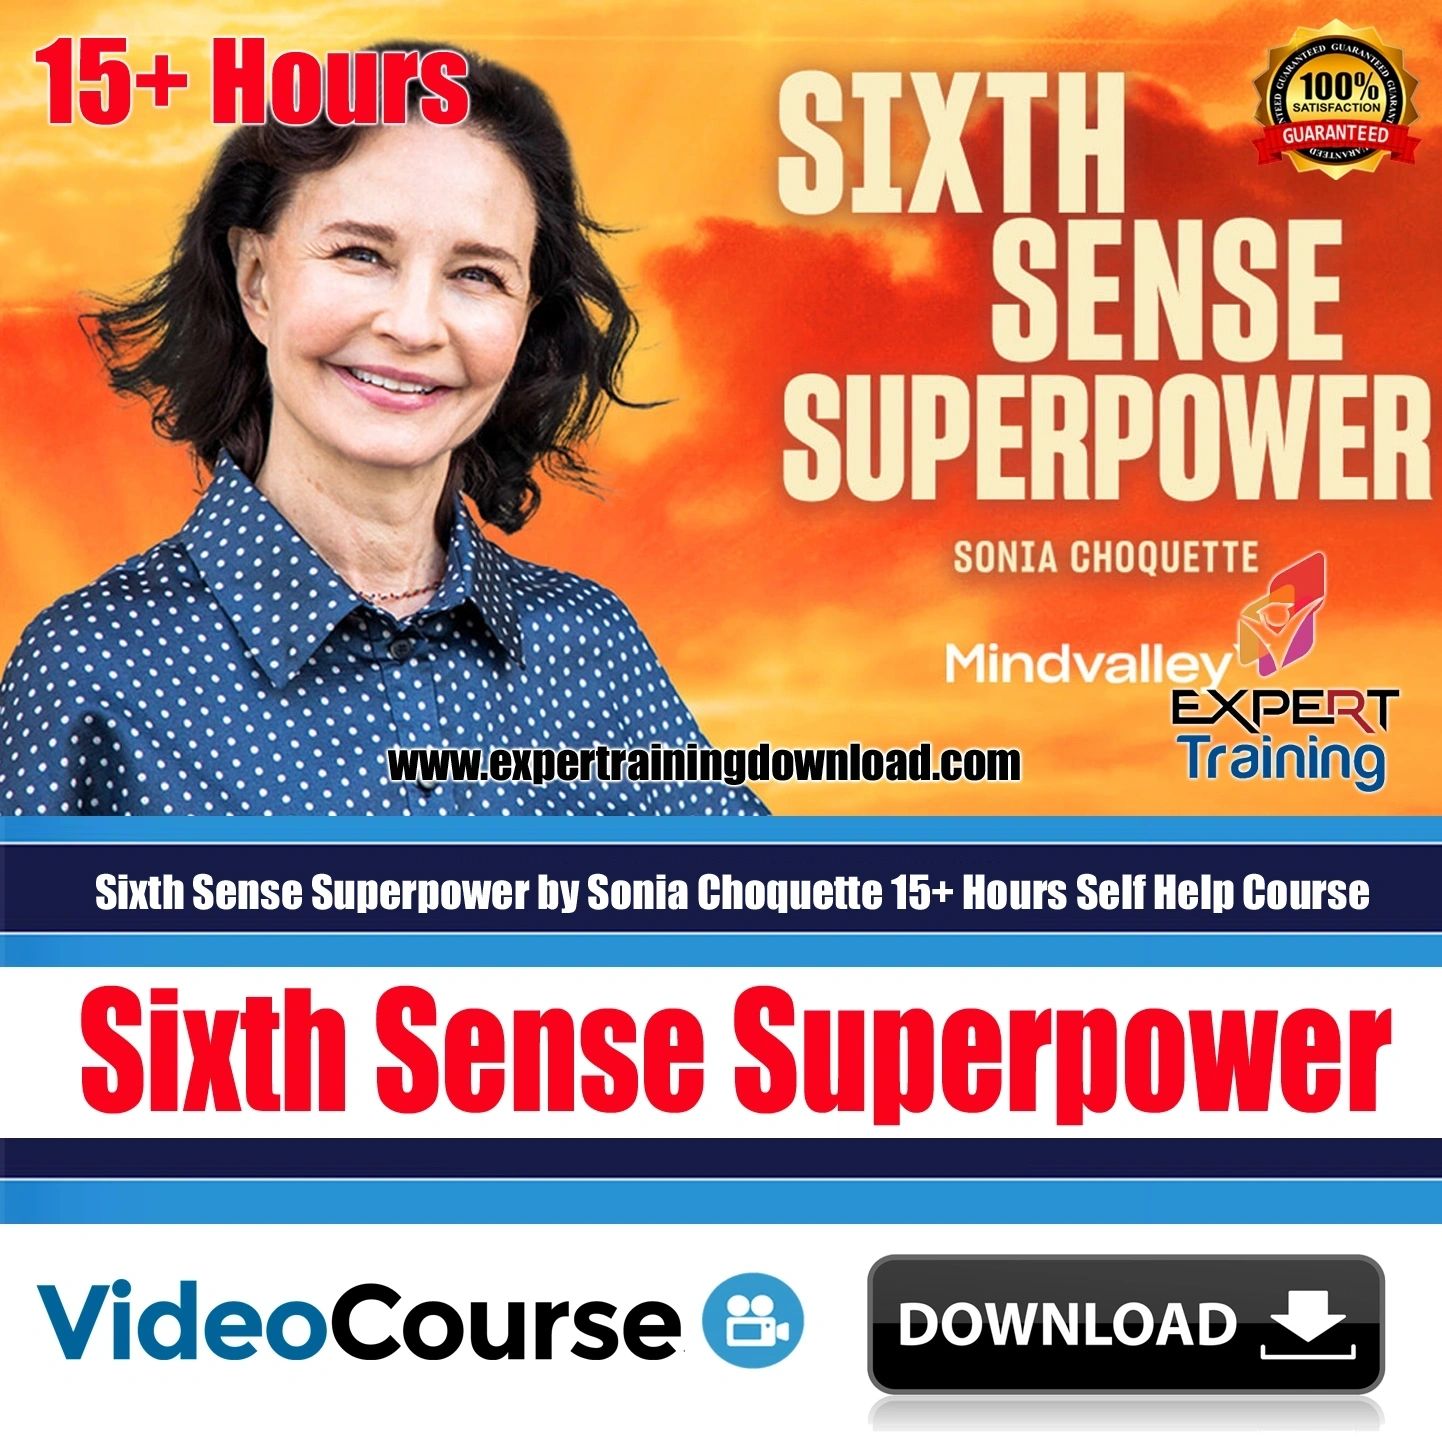 Sixth Sense Superpower 15+ Hours Self Help Course